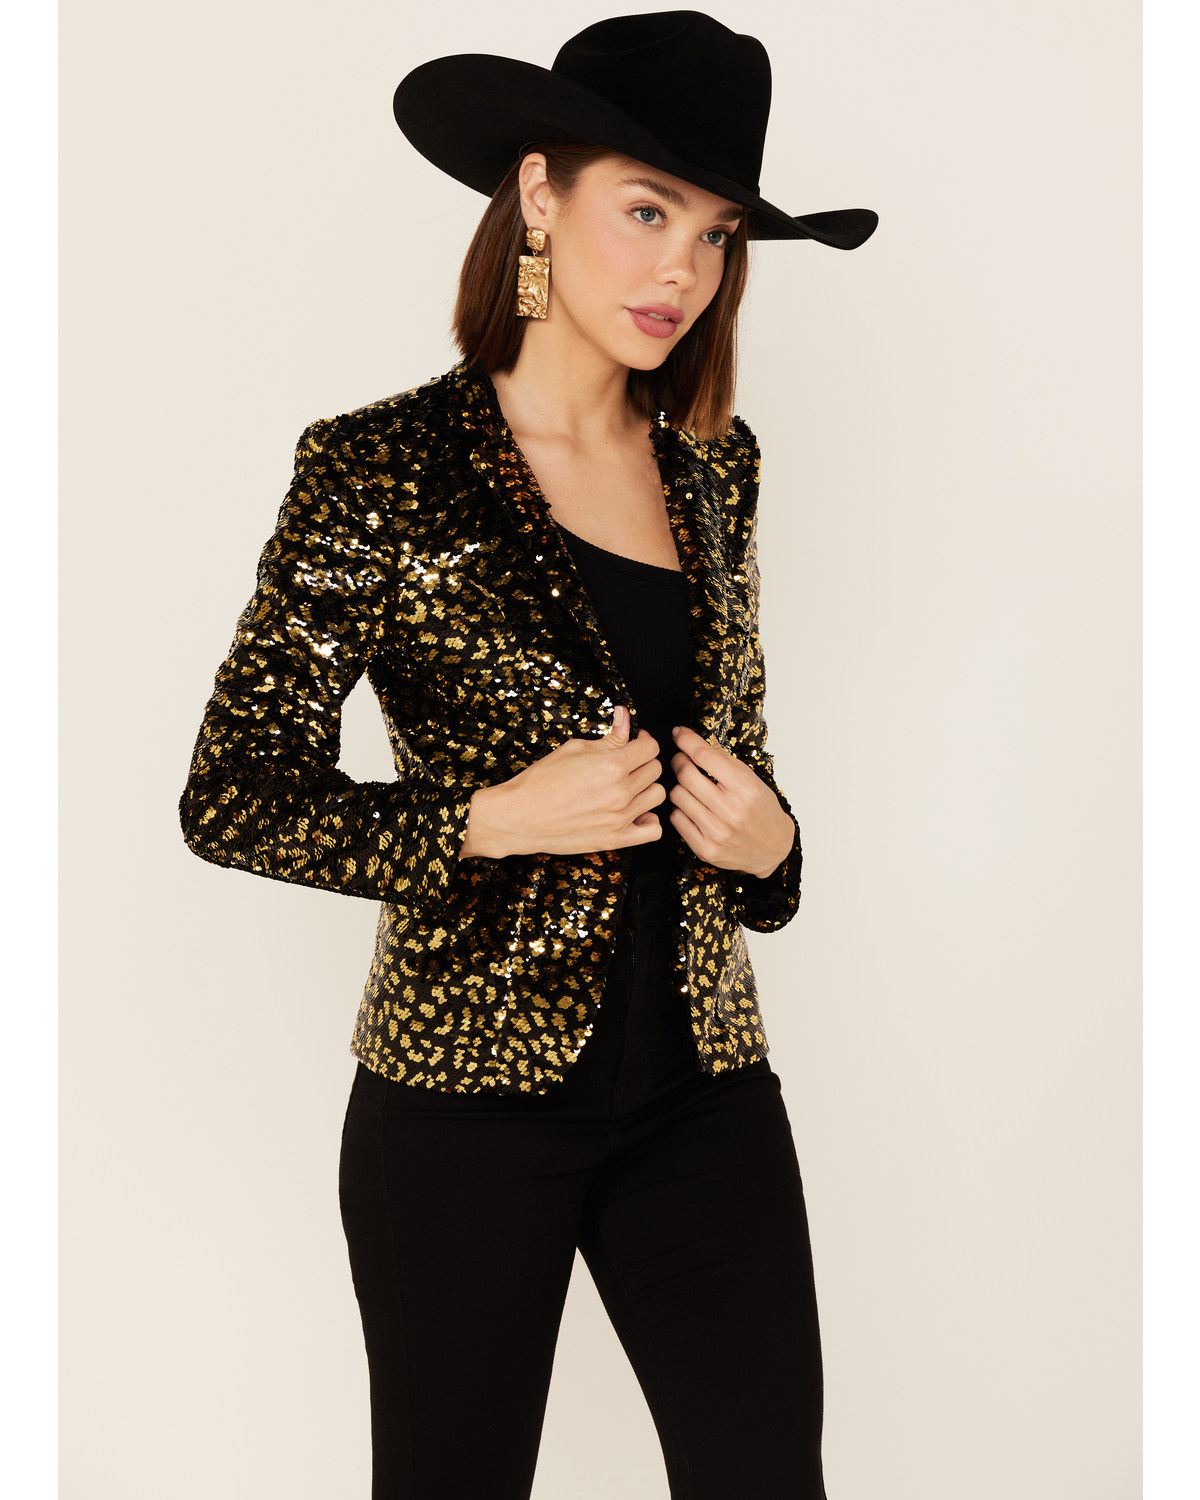 Any Old Iron Women's Sequin Scale Blazer Jacket